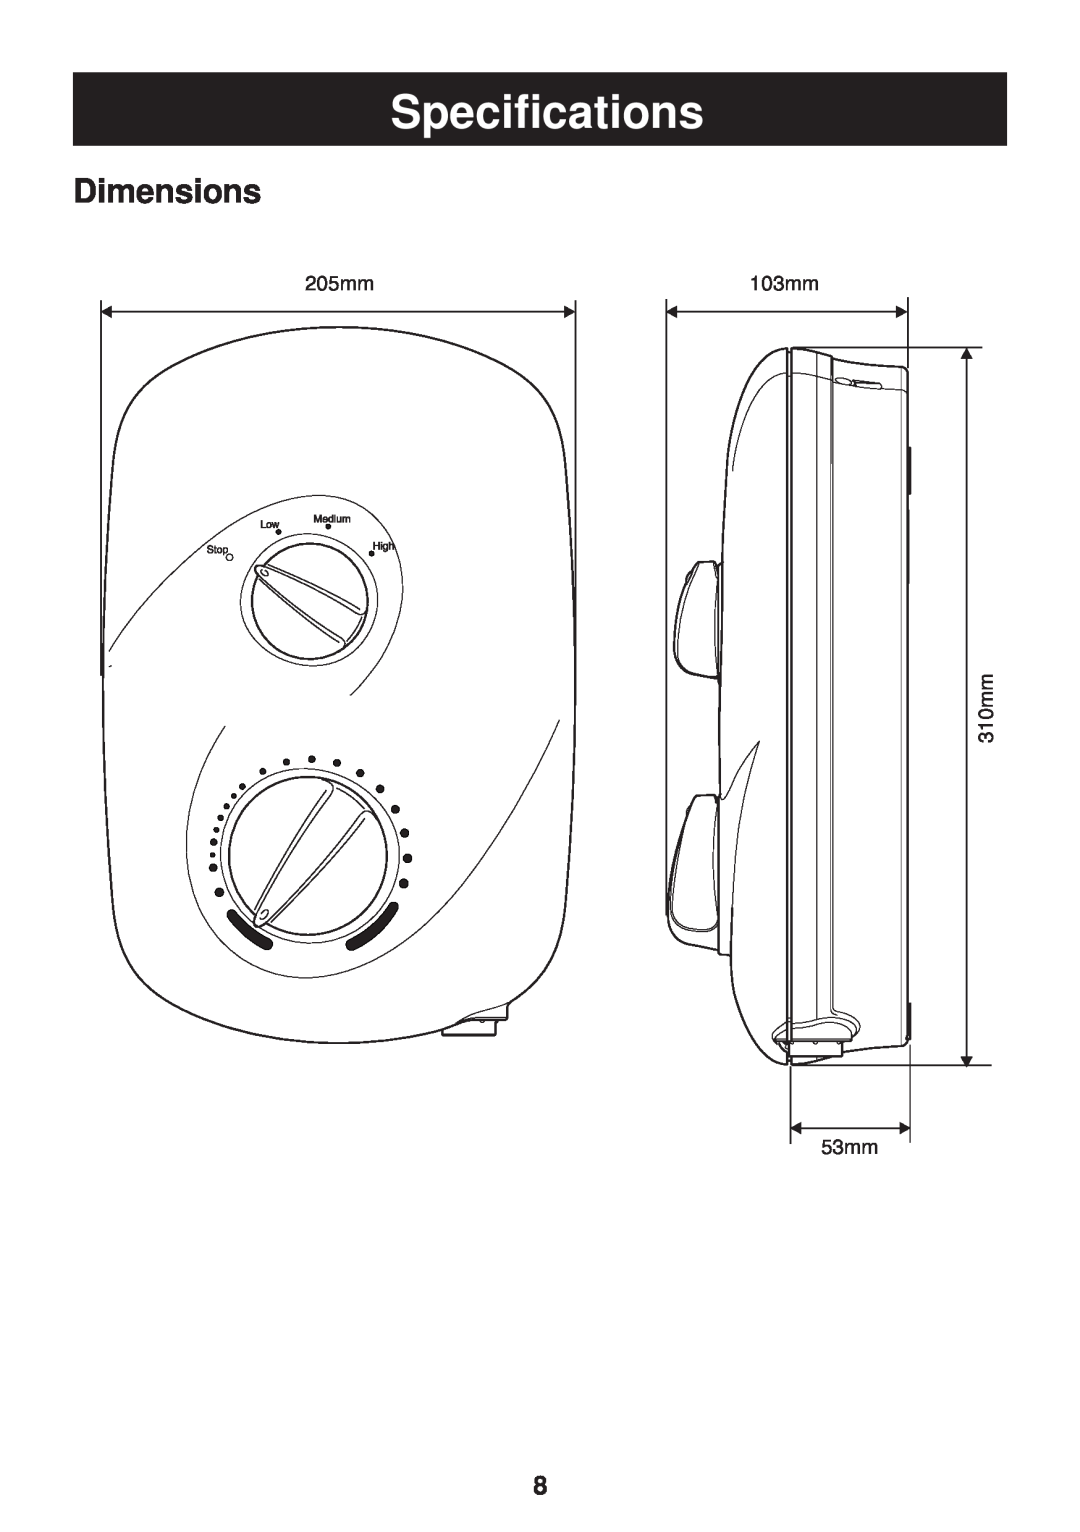 Kohler Electric Shower manual Specifications, Dimensions, 205mm, 103mm, 310mm 53mm 